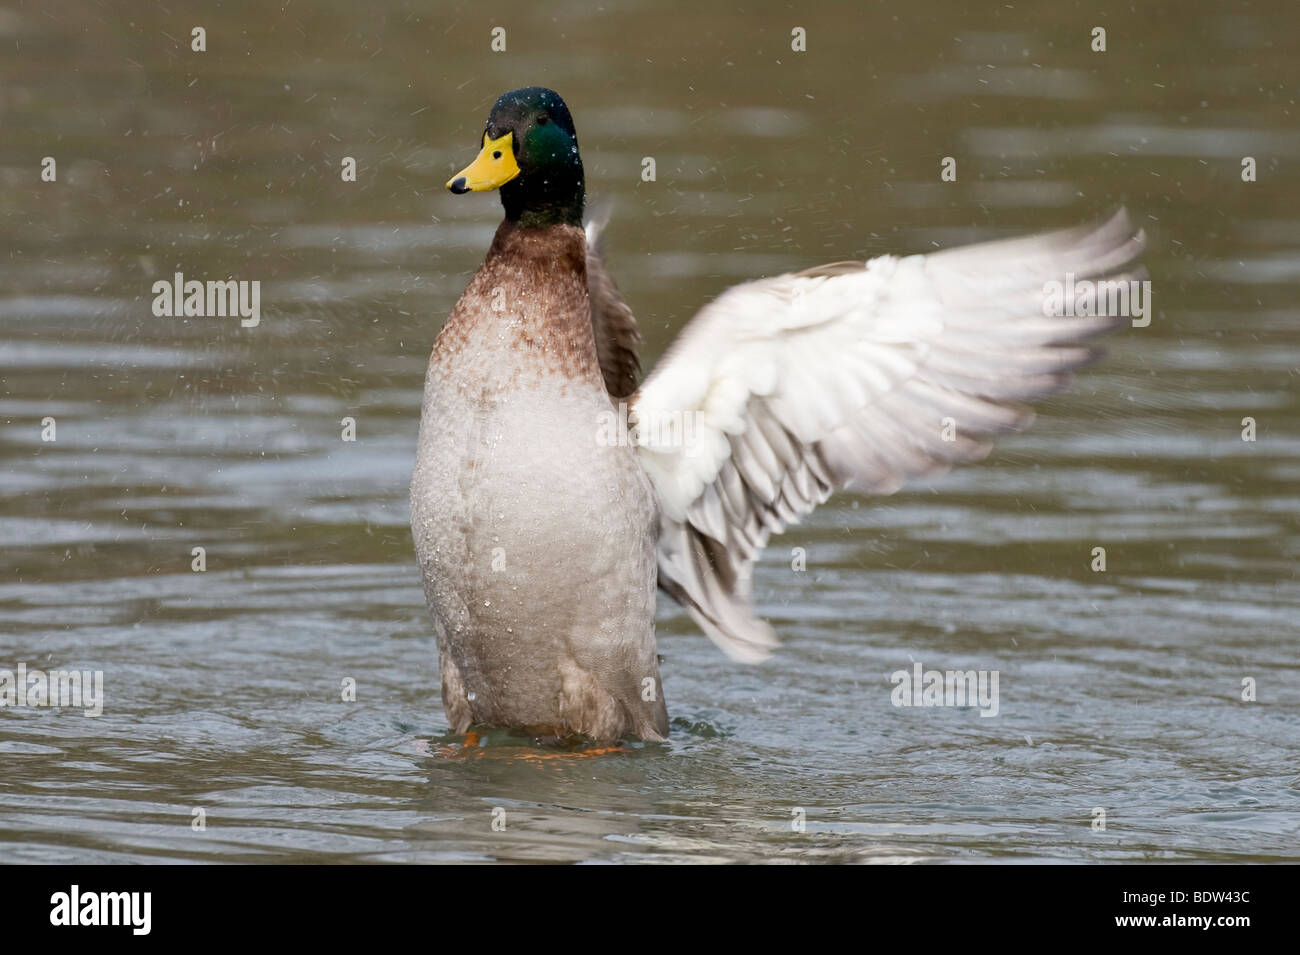 A dabbling duck beating its wings Stock Photo